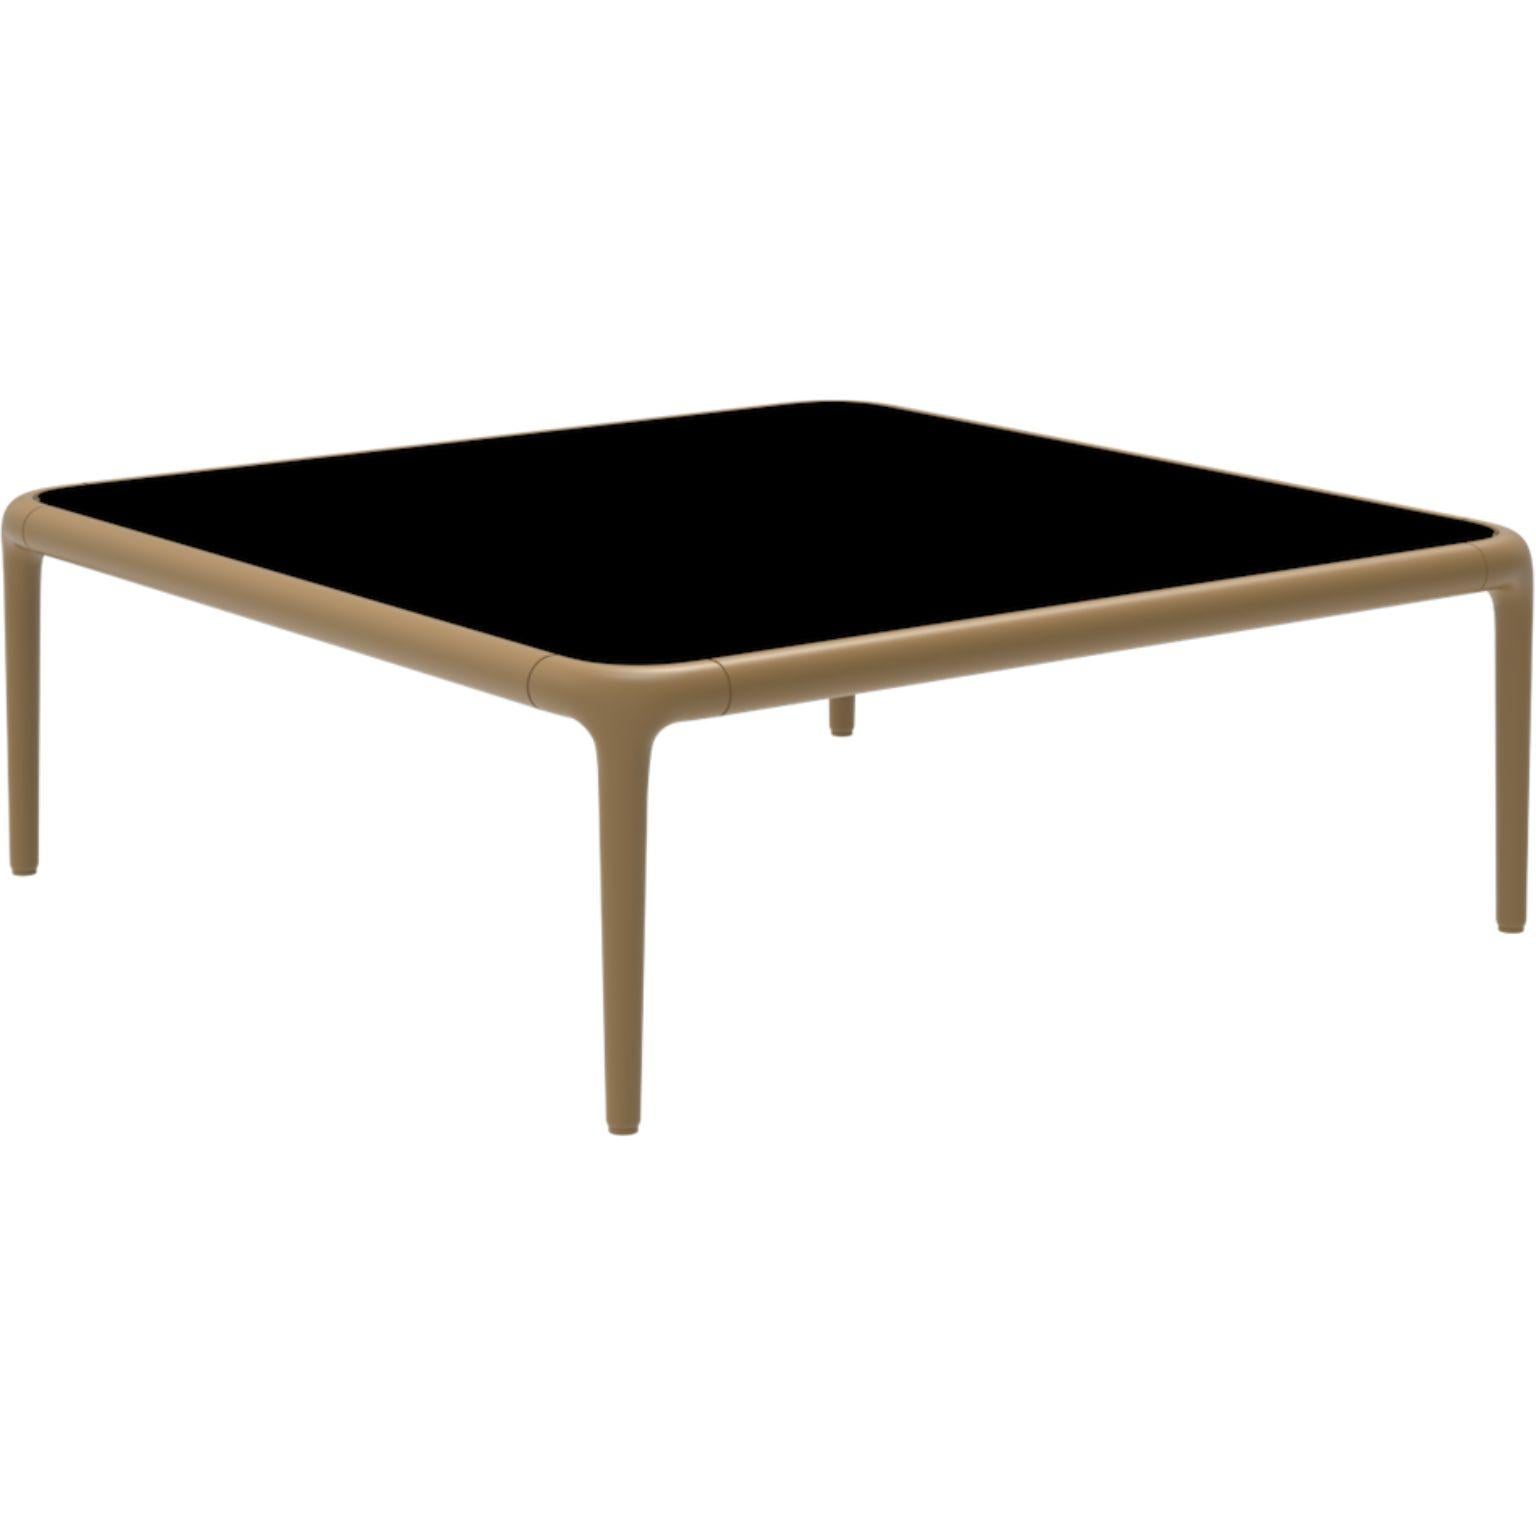 Xaloc gold coffee table 80 with glass top by Mowee
Dimensions: D 80 x W 80 x H 28 cm
Materials: Aluminum, tinted tempered glass top.
Also available in different aluminum colors and finishes (HPL Black Edge or Neolith).

Xaloc synthesizes the